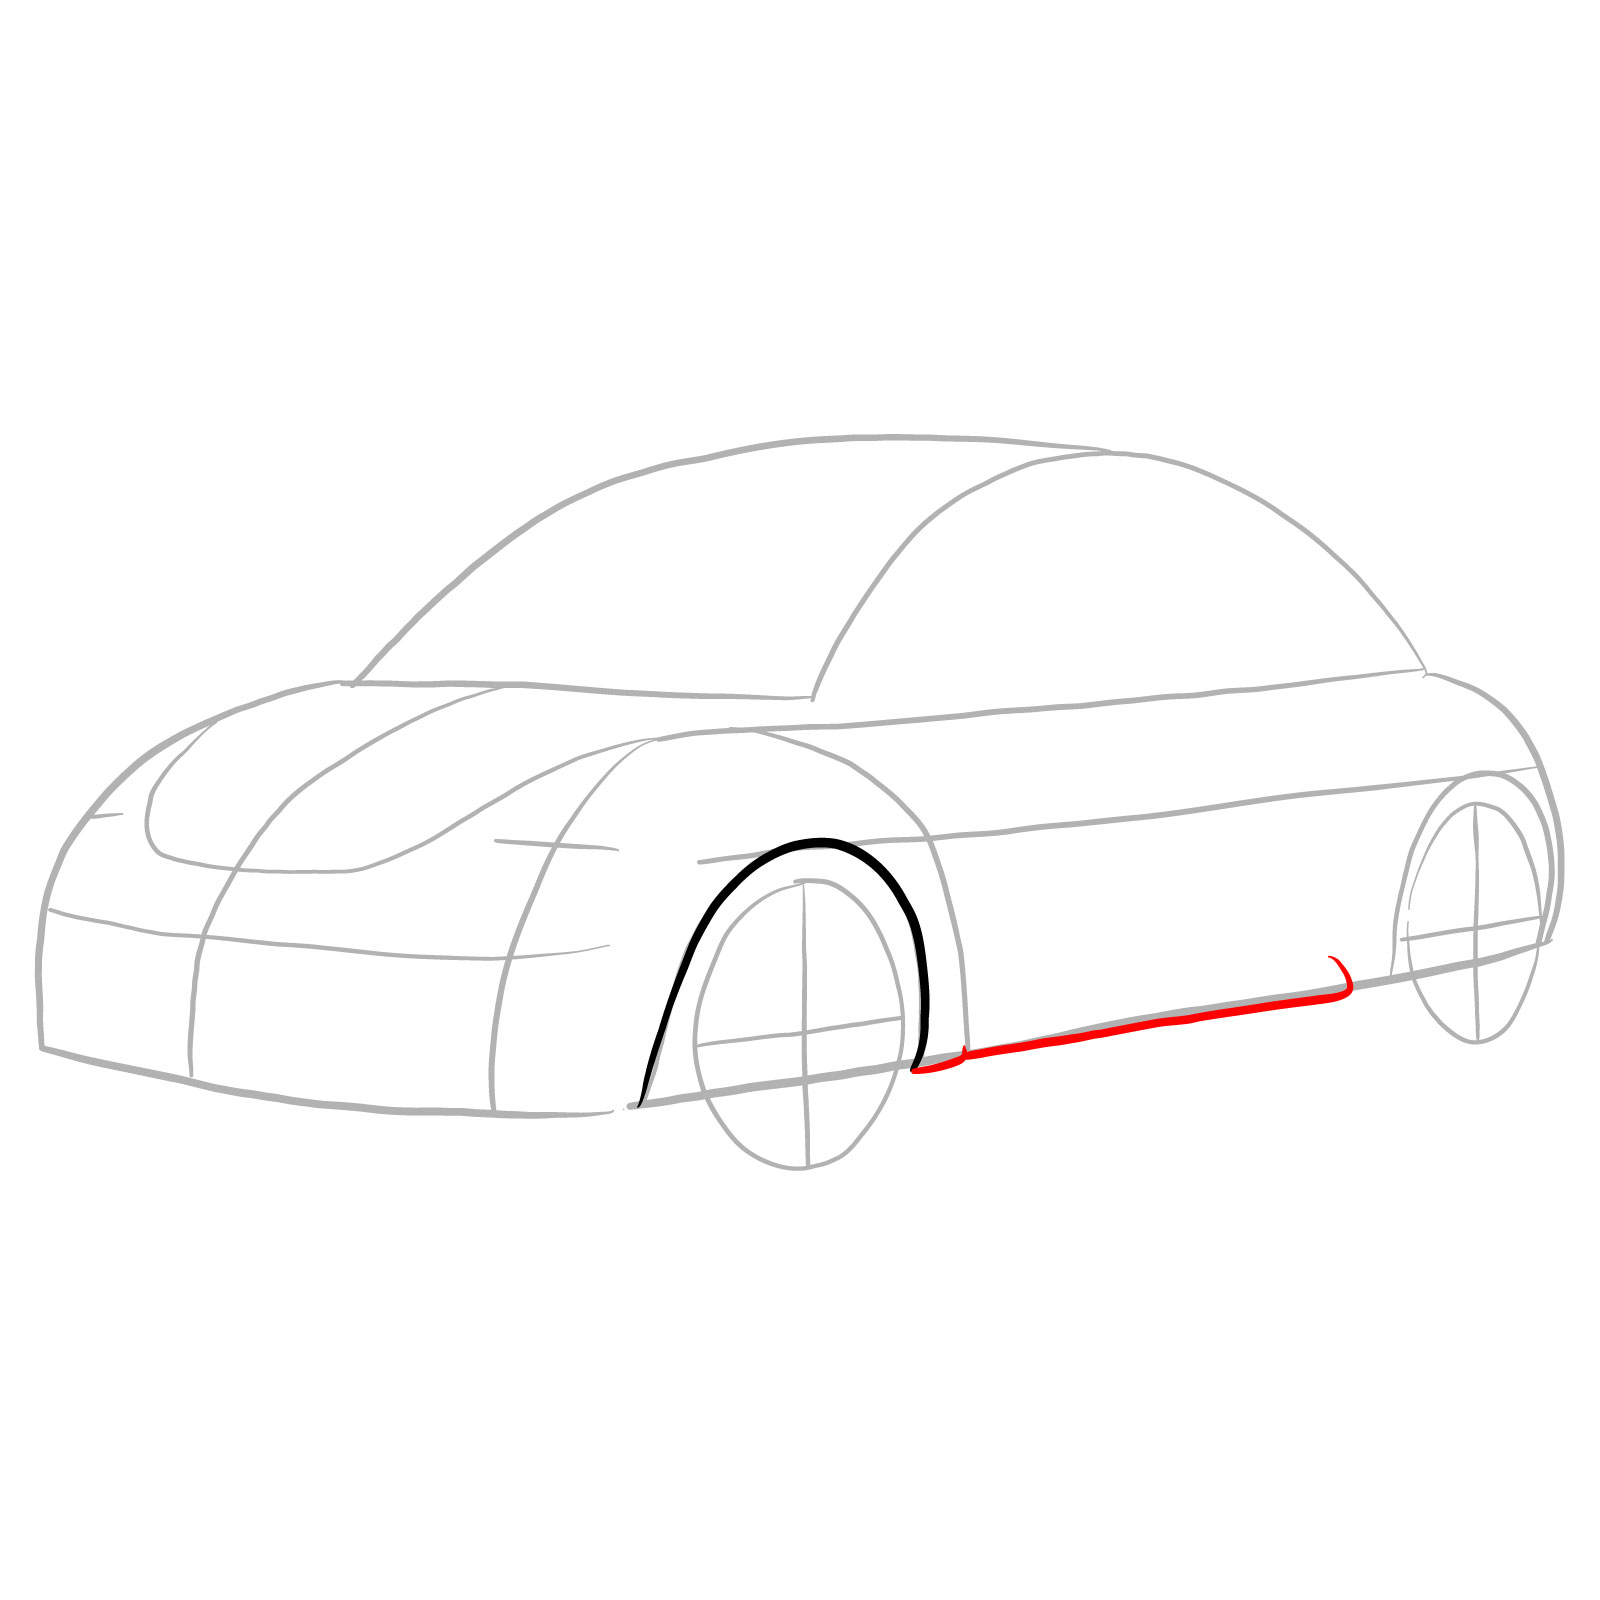 How to draw Volkswagen New Beetle - step 05